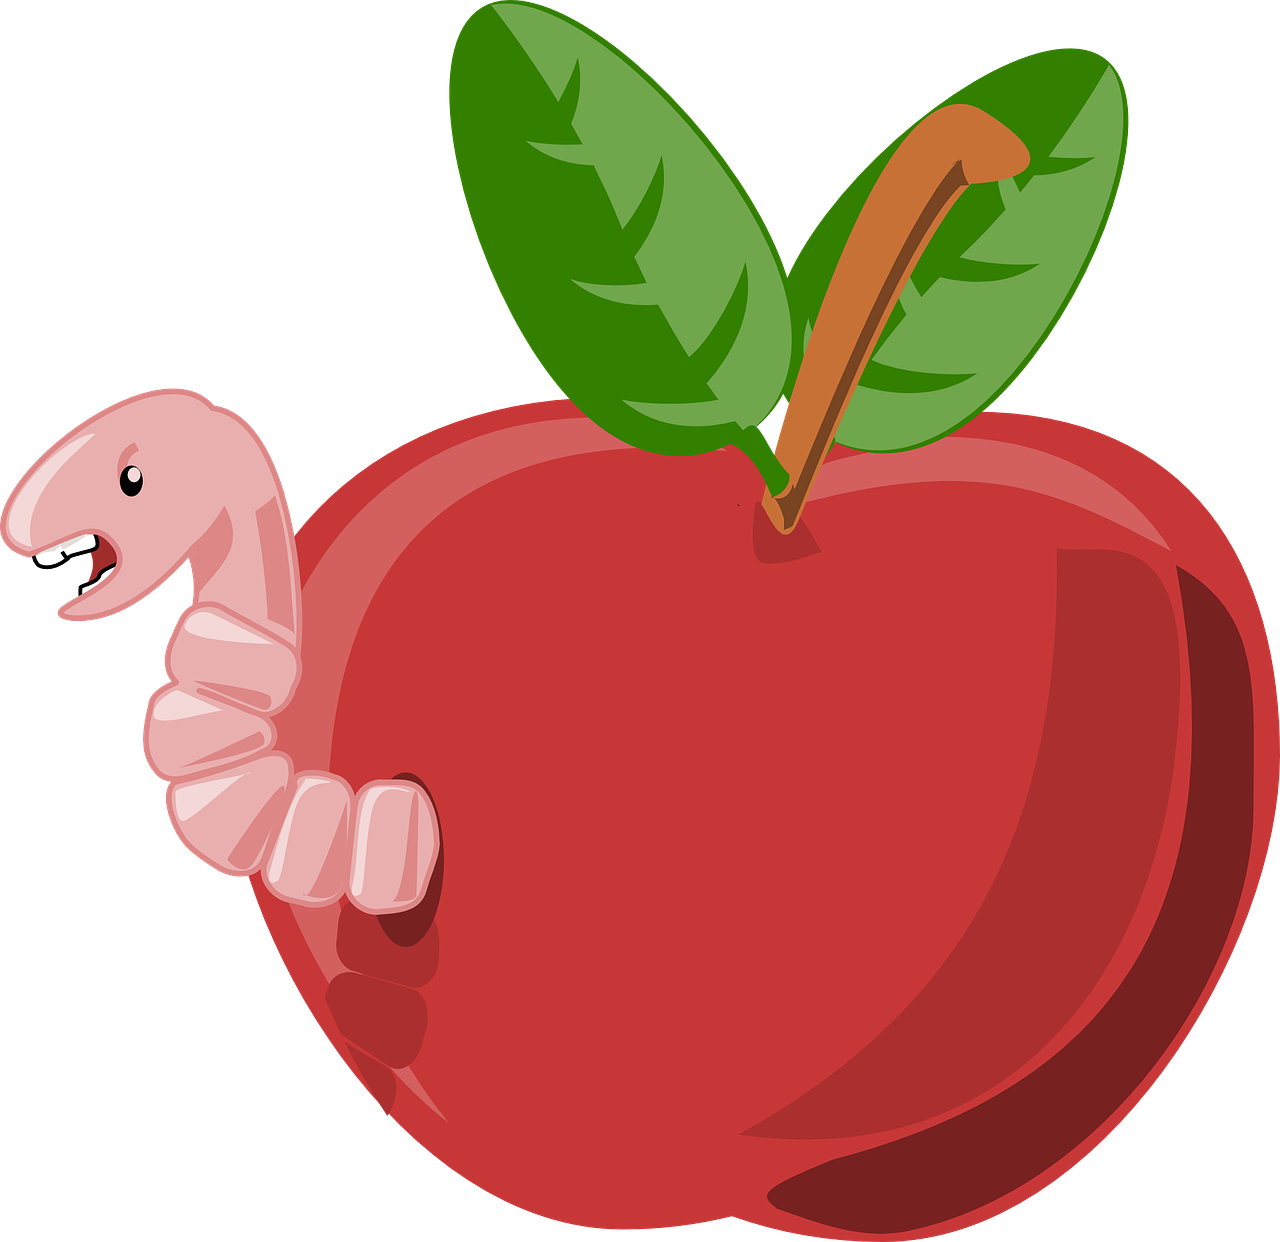 apple red worm free photo